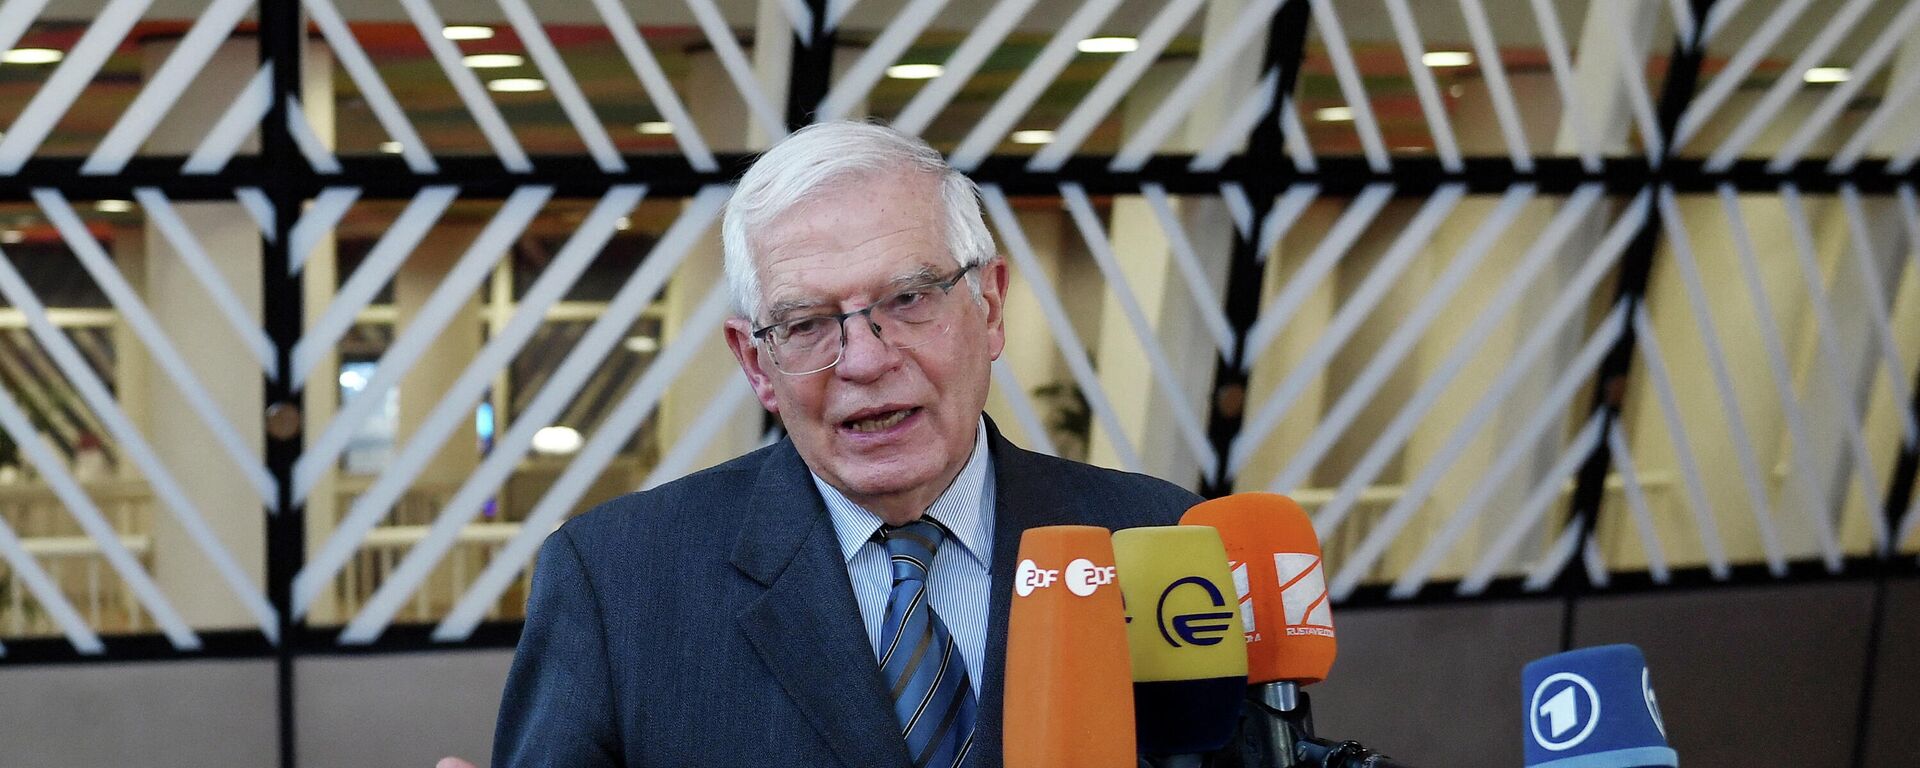 European Union for Foreign Affairs and Security Policy Josep Borrell and US State Secretary Antony Blinken (not pictured) speak to the media ahead of a meeting at the EU Council Building in Brussels, Belgium, March 4, 2022 - Sputnik International, 1920, 10.03.2022